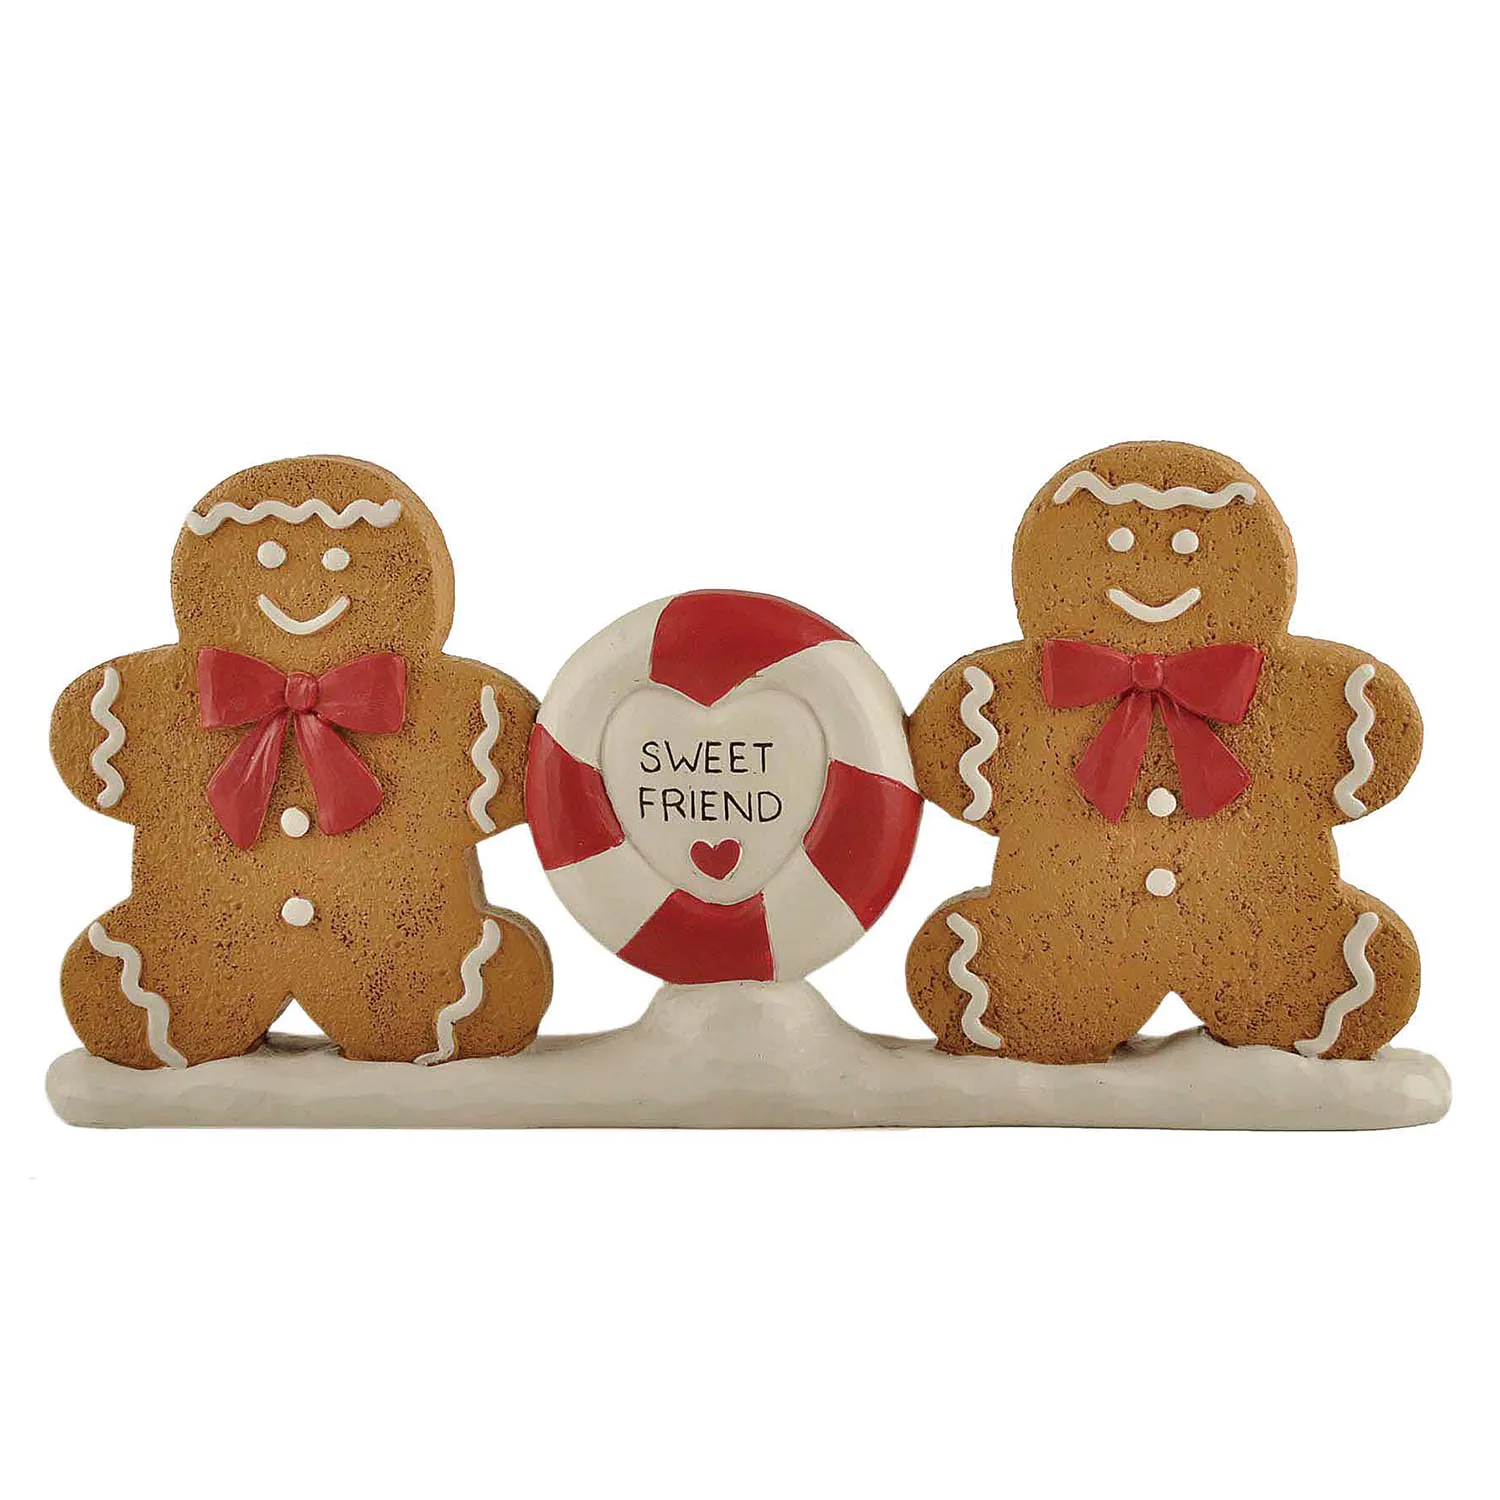 Seasonal Gifts Resin Christmas Crafts Two Cute Gingerbread men with Candy on Snow Base for Home Decor 238-13741